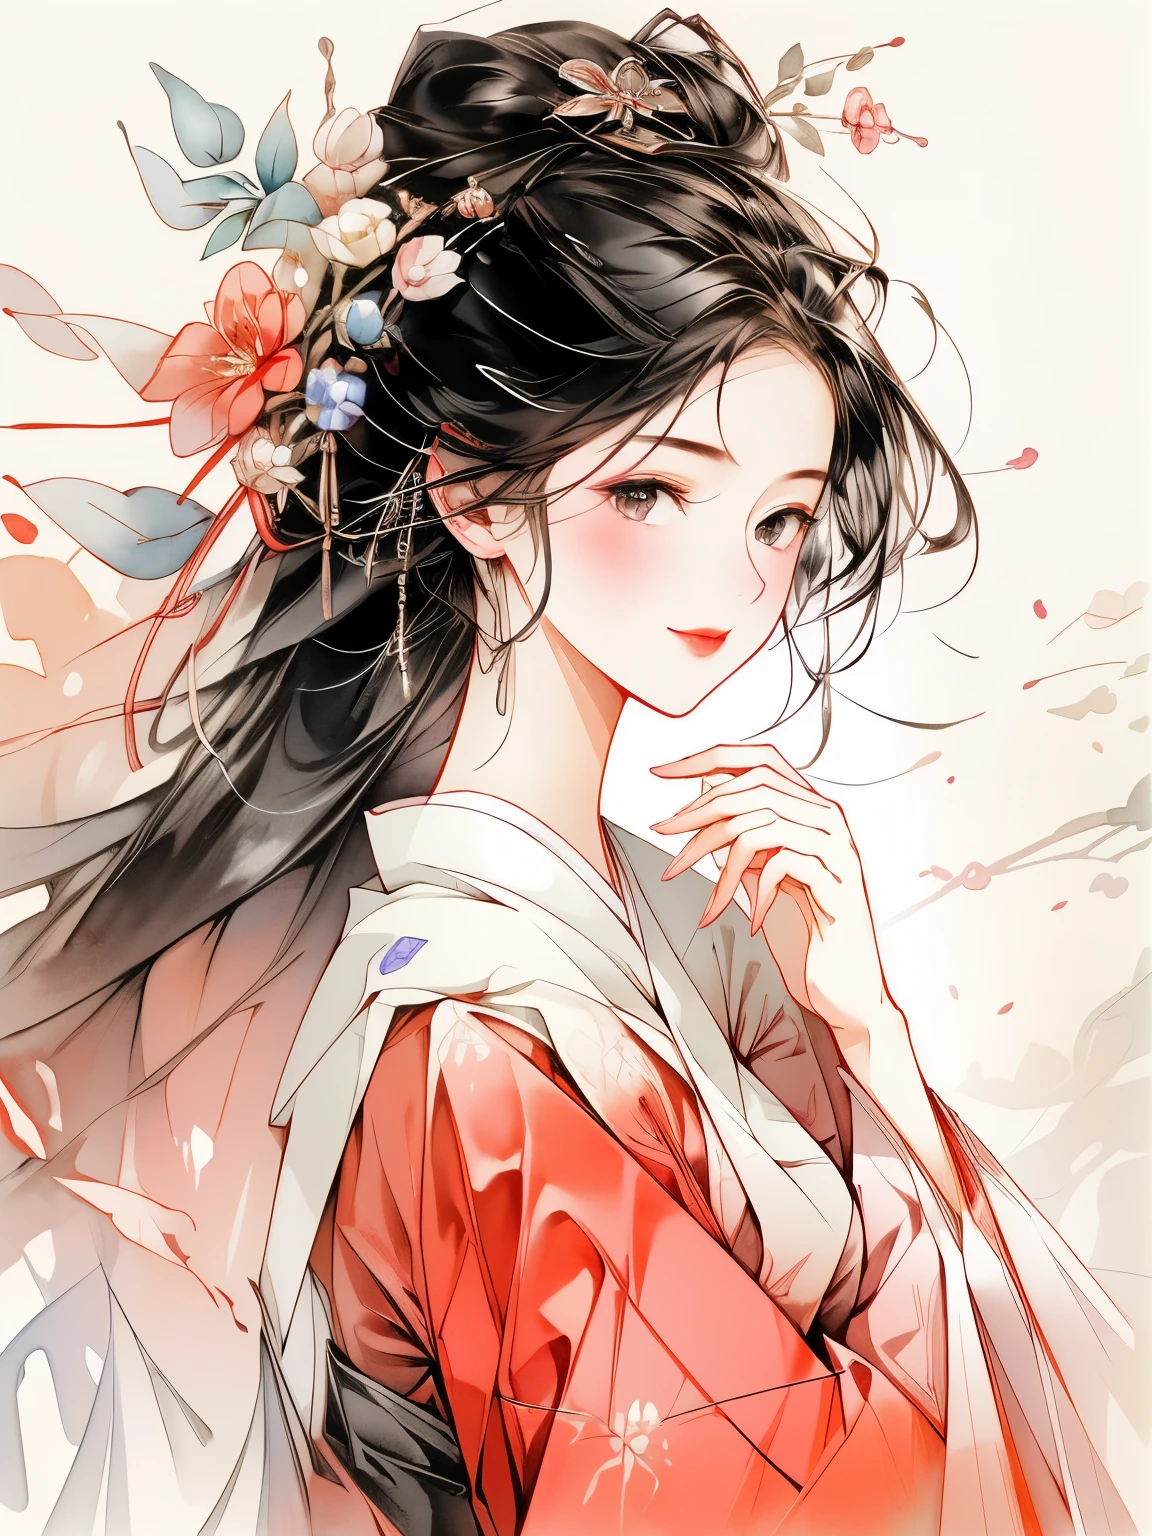 watercolor:1.5, Masterpiece, Committed to ultra-high definition and vivid colors, Super detailed, Attention to detail, highest quality,, Beautiful watercolor painting, 18-year-old, woman, Dressed in a twelve-layered kimono, Her hair is held in place by a red hair clip, Black Hair, She is smiling with a very beautiful expression, The background is filled with colorful flowers, which fill the entire screen.